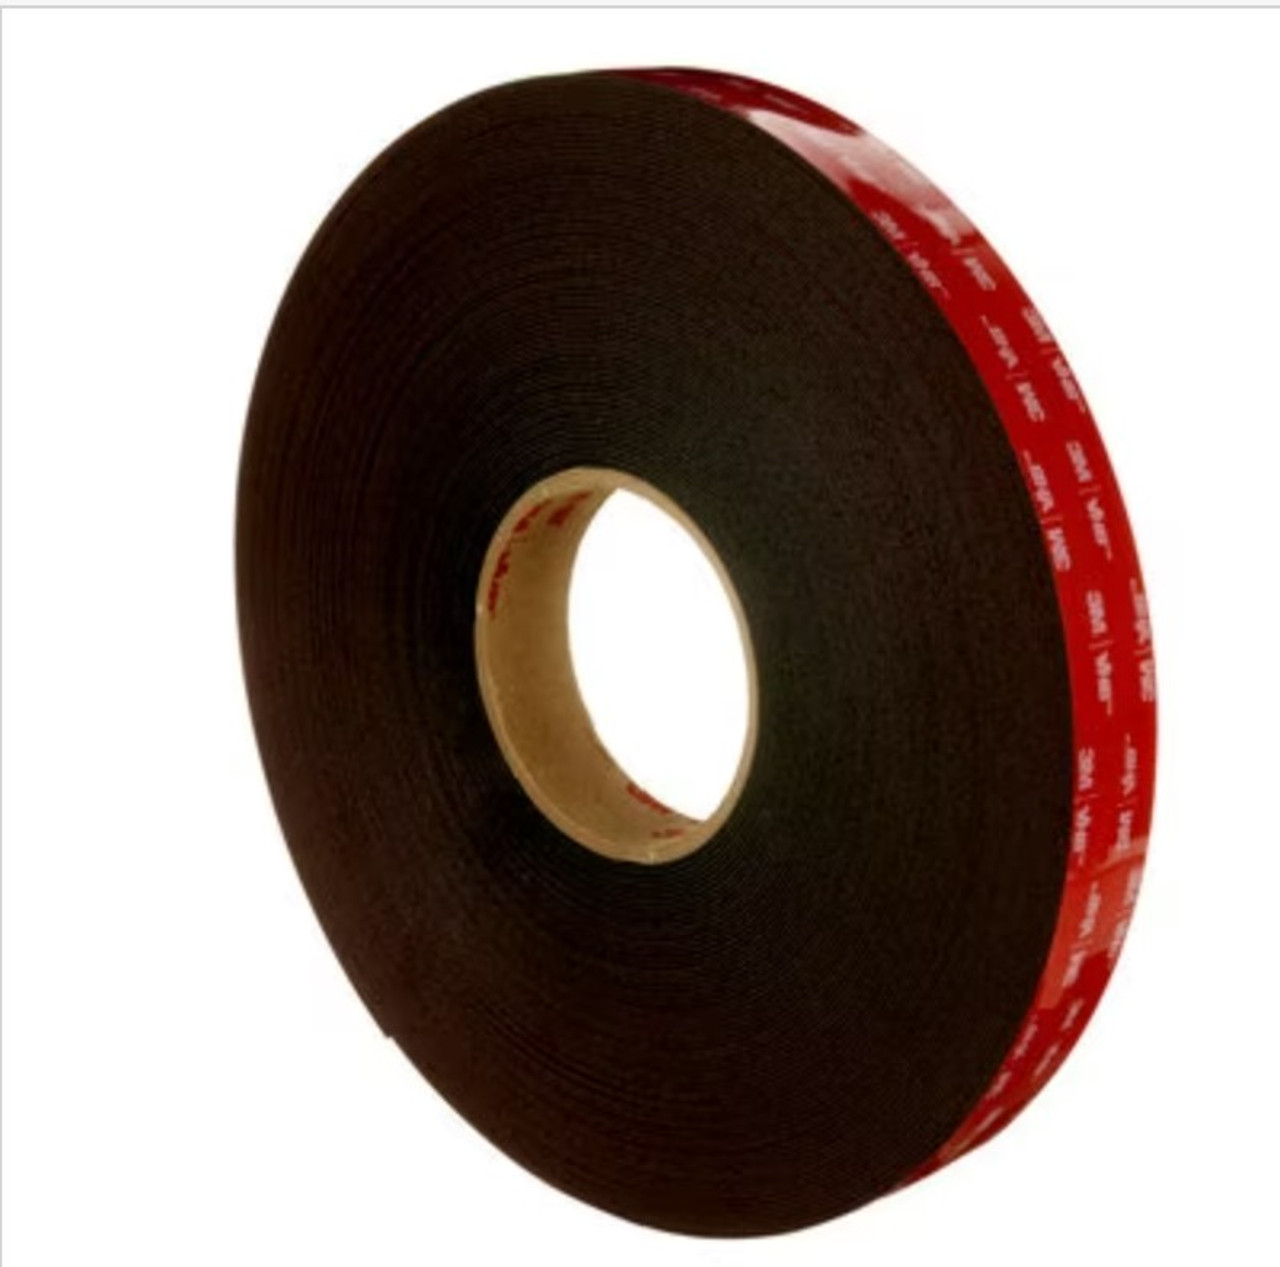 3M™ VHB™ 5952 Double Sided Tape, 45 mil, Black